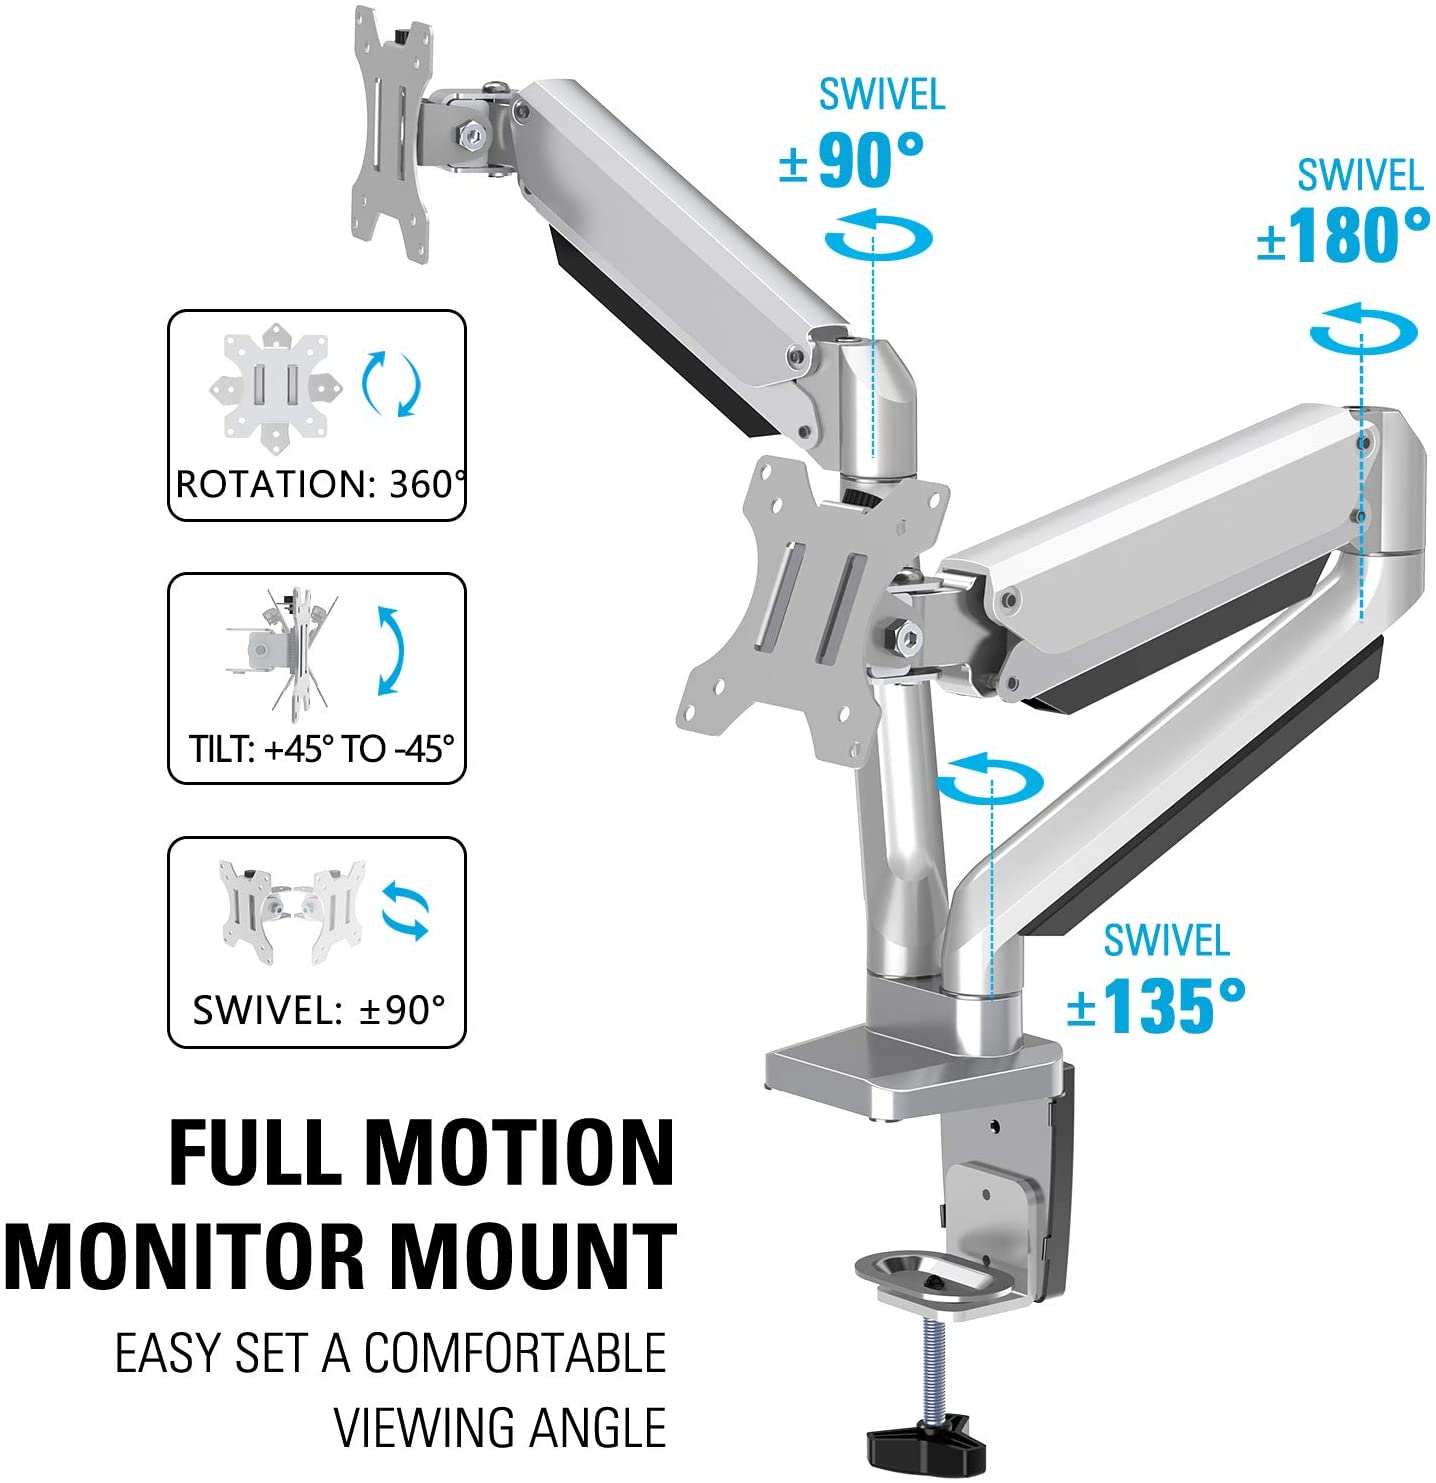 MOUNTUP Dual Monitor Desk Mount, Die-Cast Aluminum Fully Adjustable Double Monitor Arm with Gas Spring, Computer Monitor Stand Fits 2 Screen 17 to 32